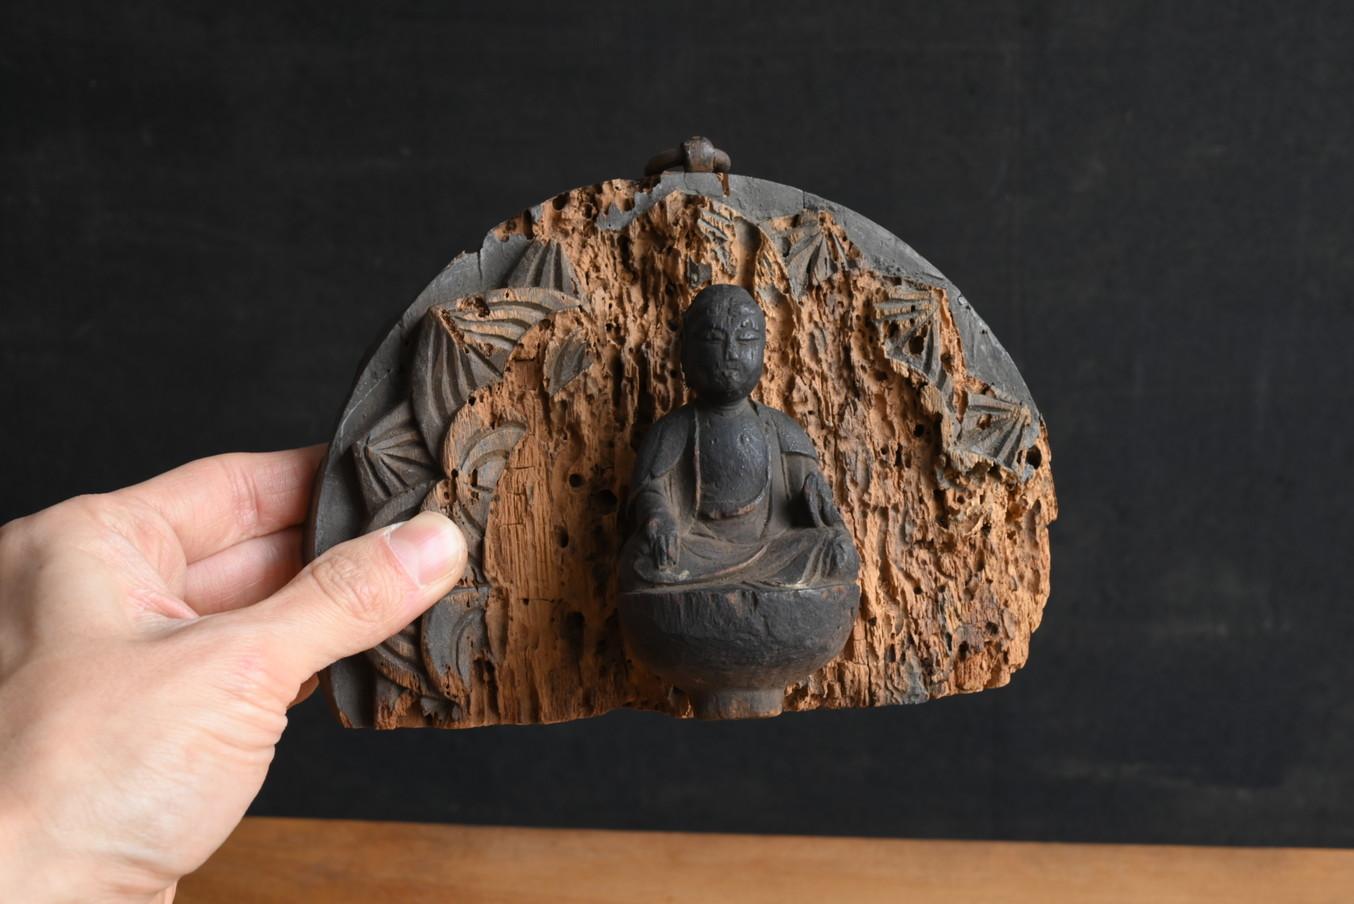 This is a wooden Buddha statue made around the Edo period in Japan.
Although it is a small Buddha statue, it has a strong presence and is beautiful.
Originally, there was a wooden pedestal, but these have been lost and only the main body of the